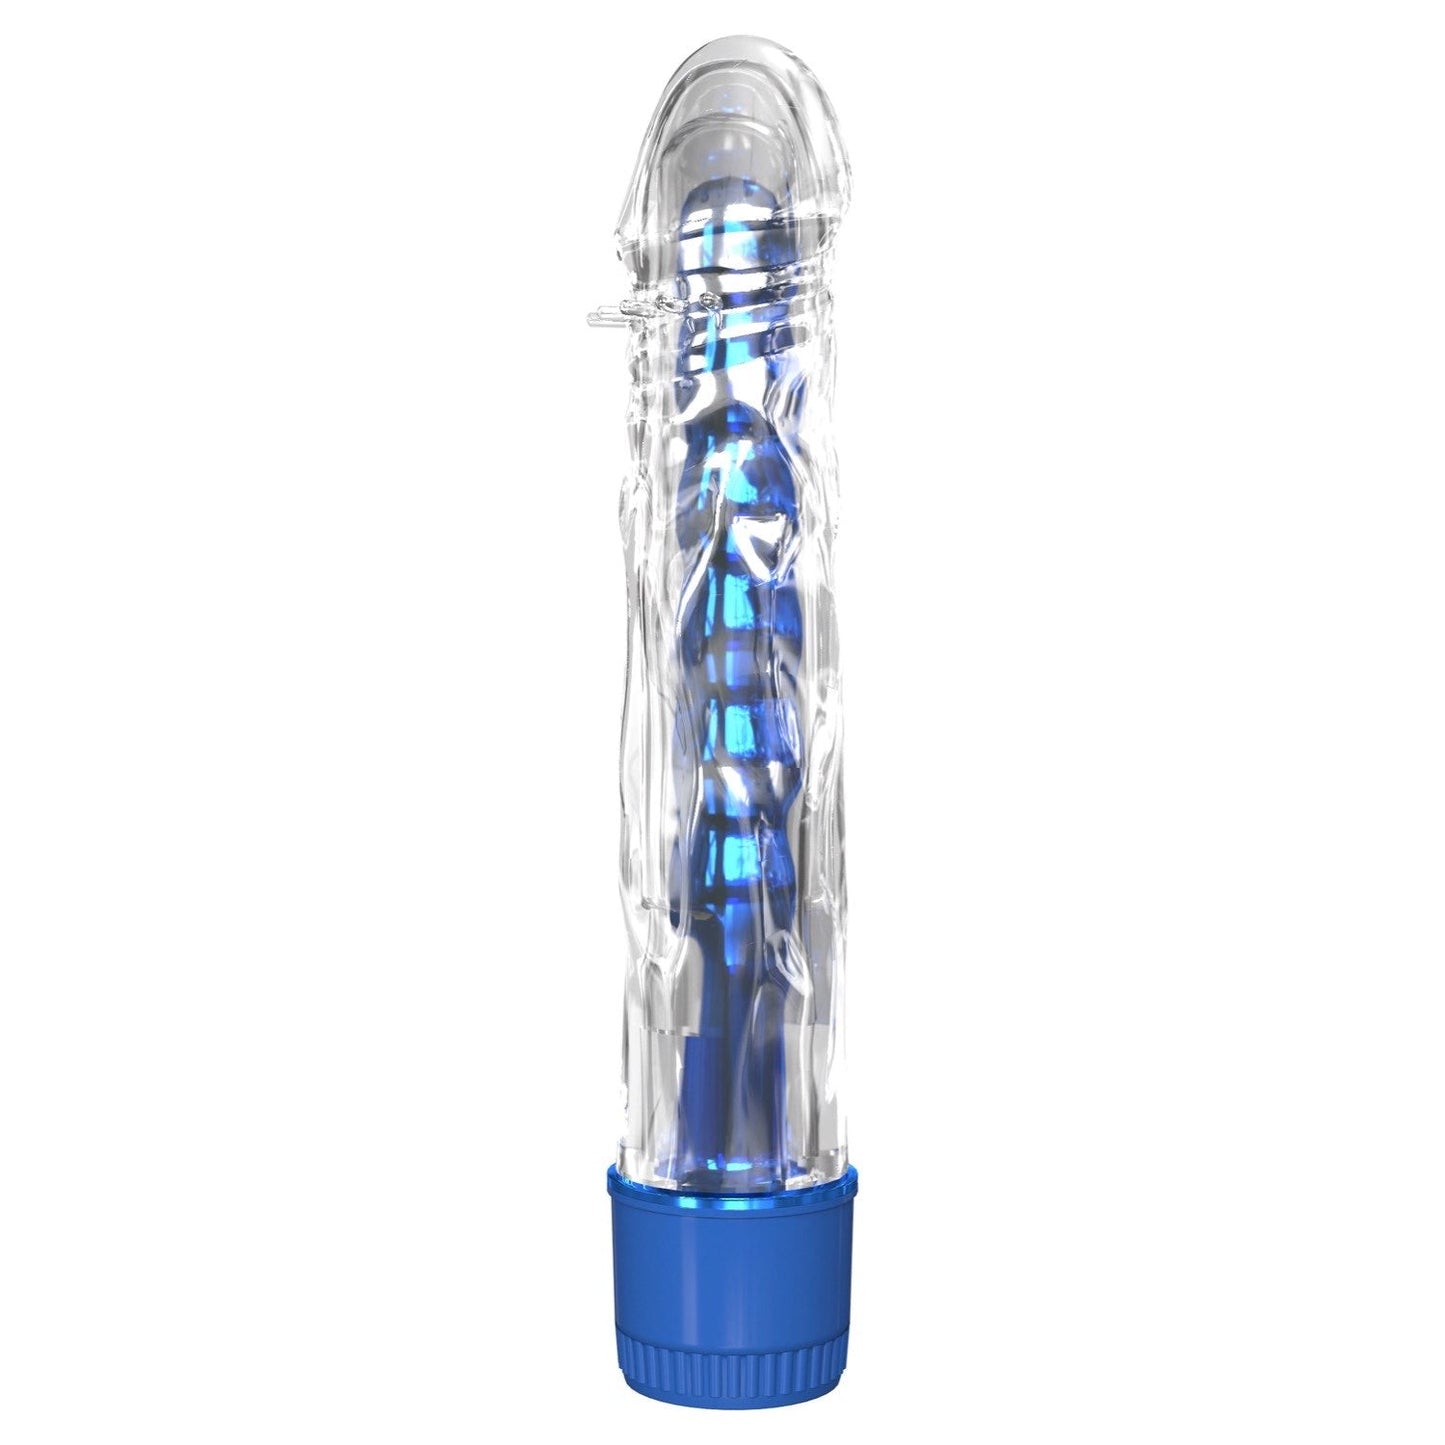 Mr Twister - Metallic Blue 16.5 cm (6") Vibrator with Clear Sleeve